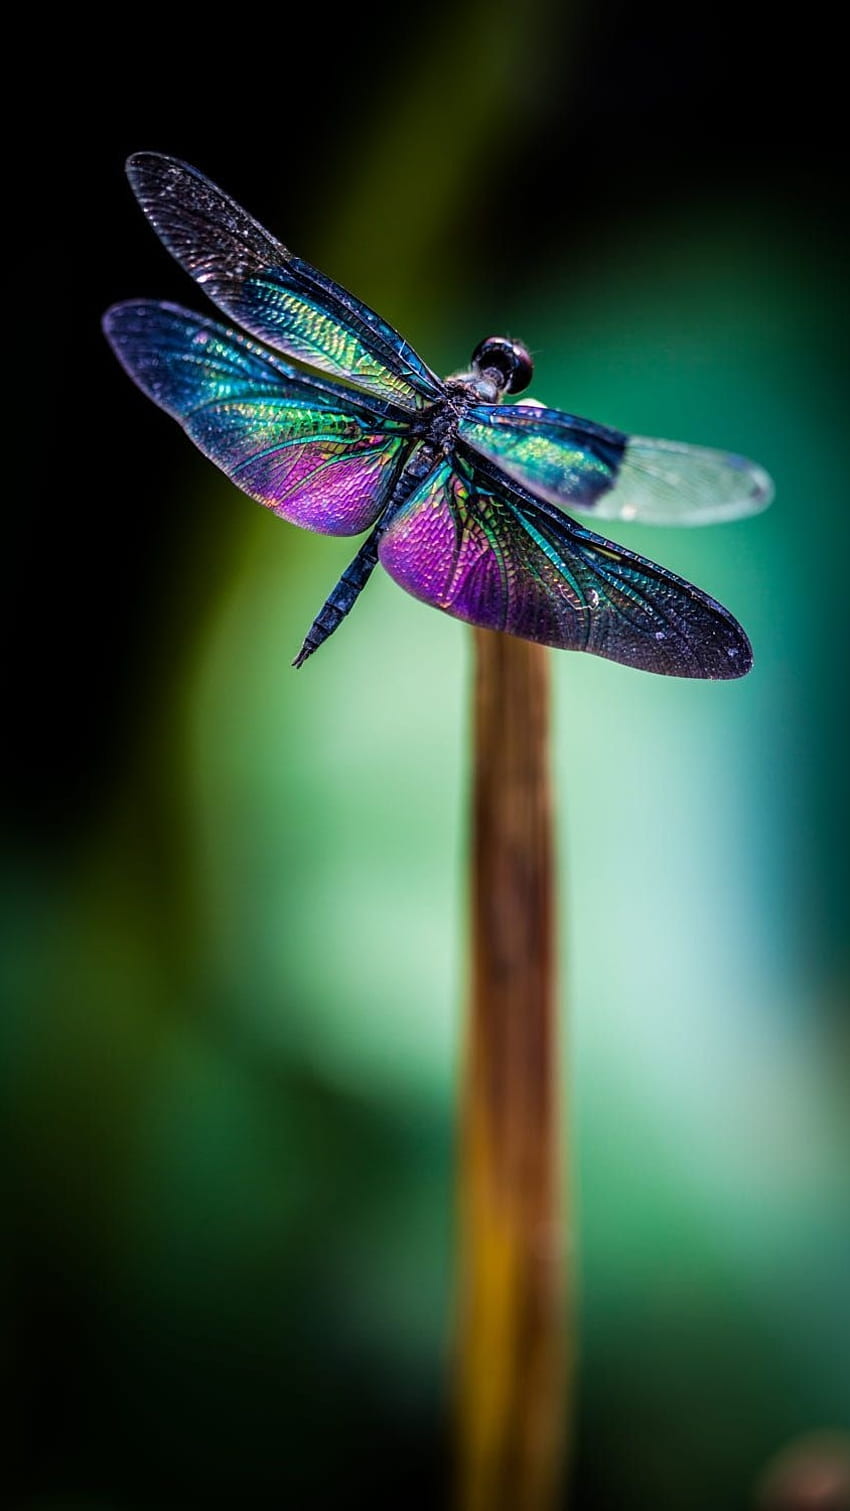 Dragonfly Mobile Wallpaper Images Free Download on Lovepik  400300384